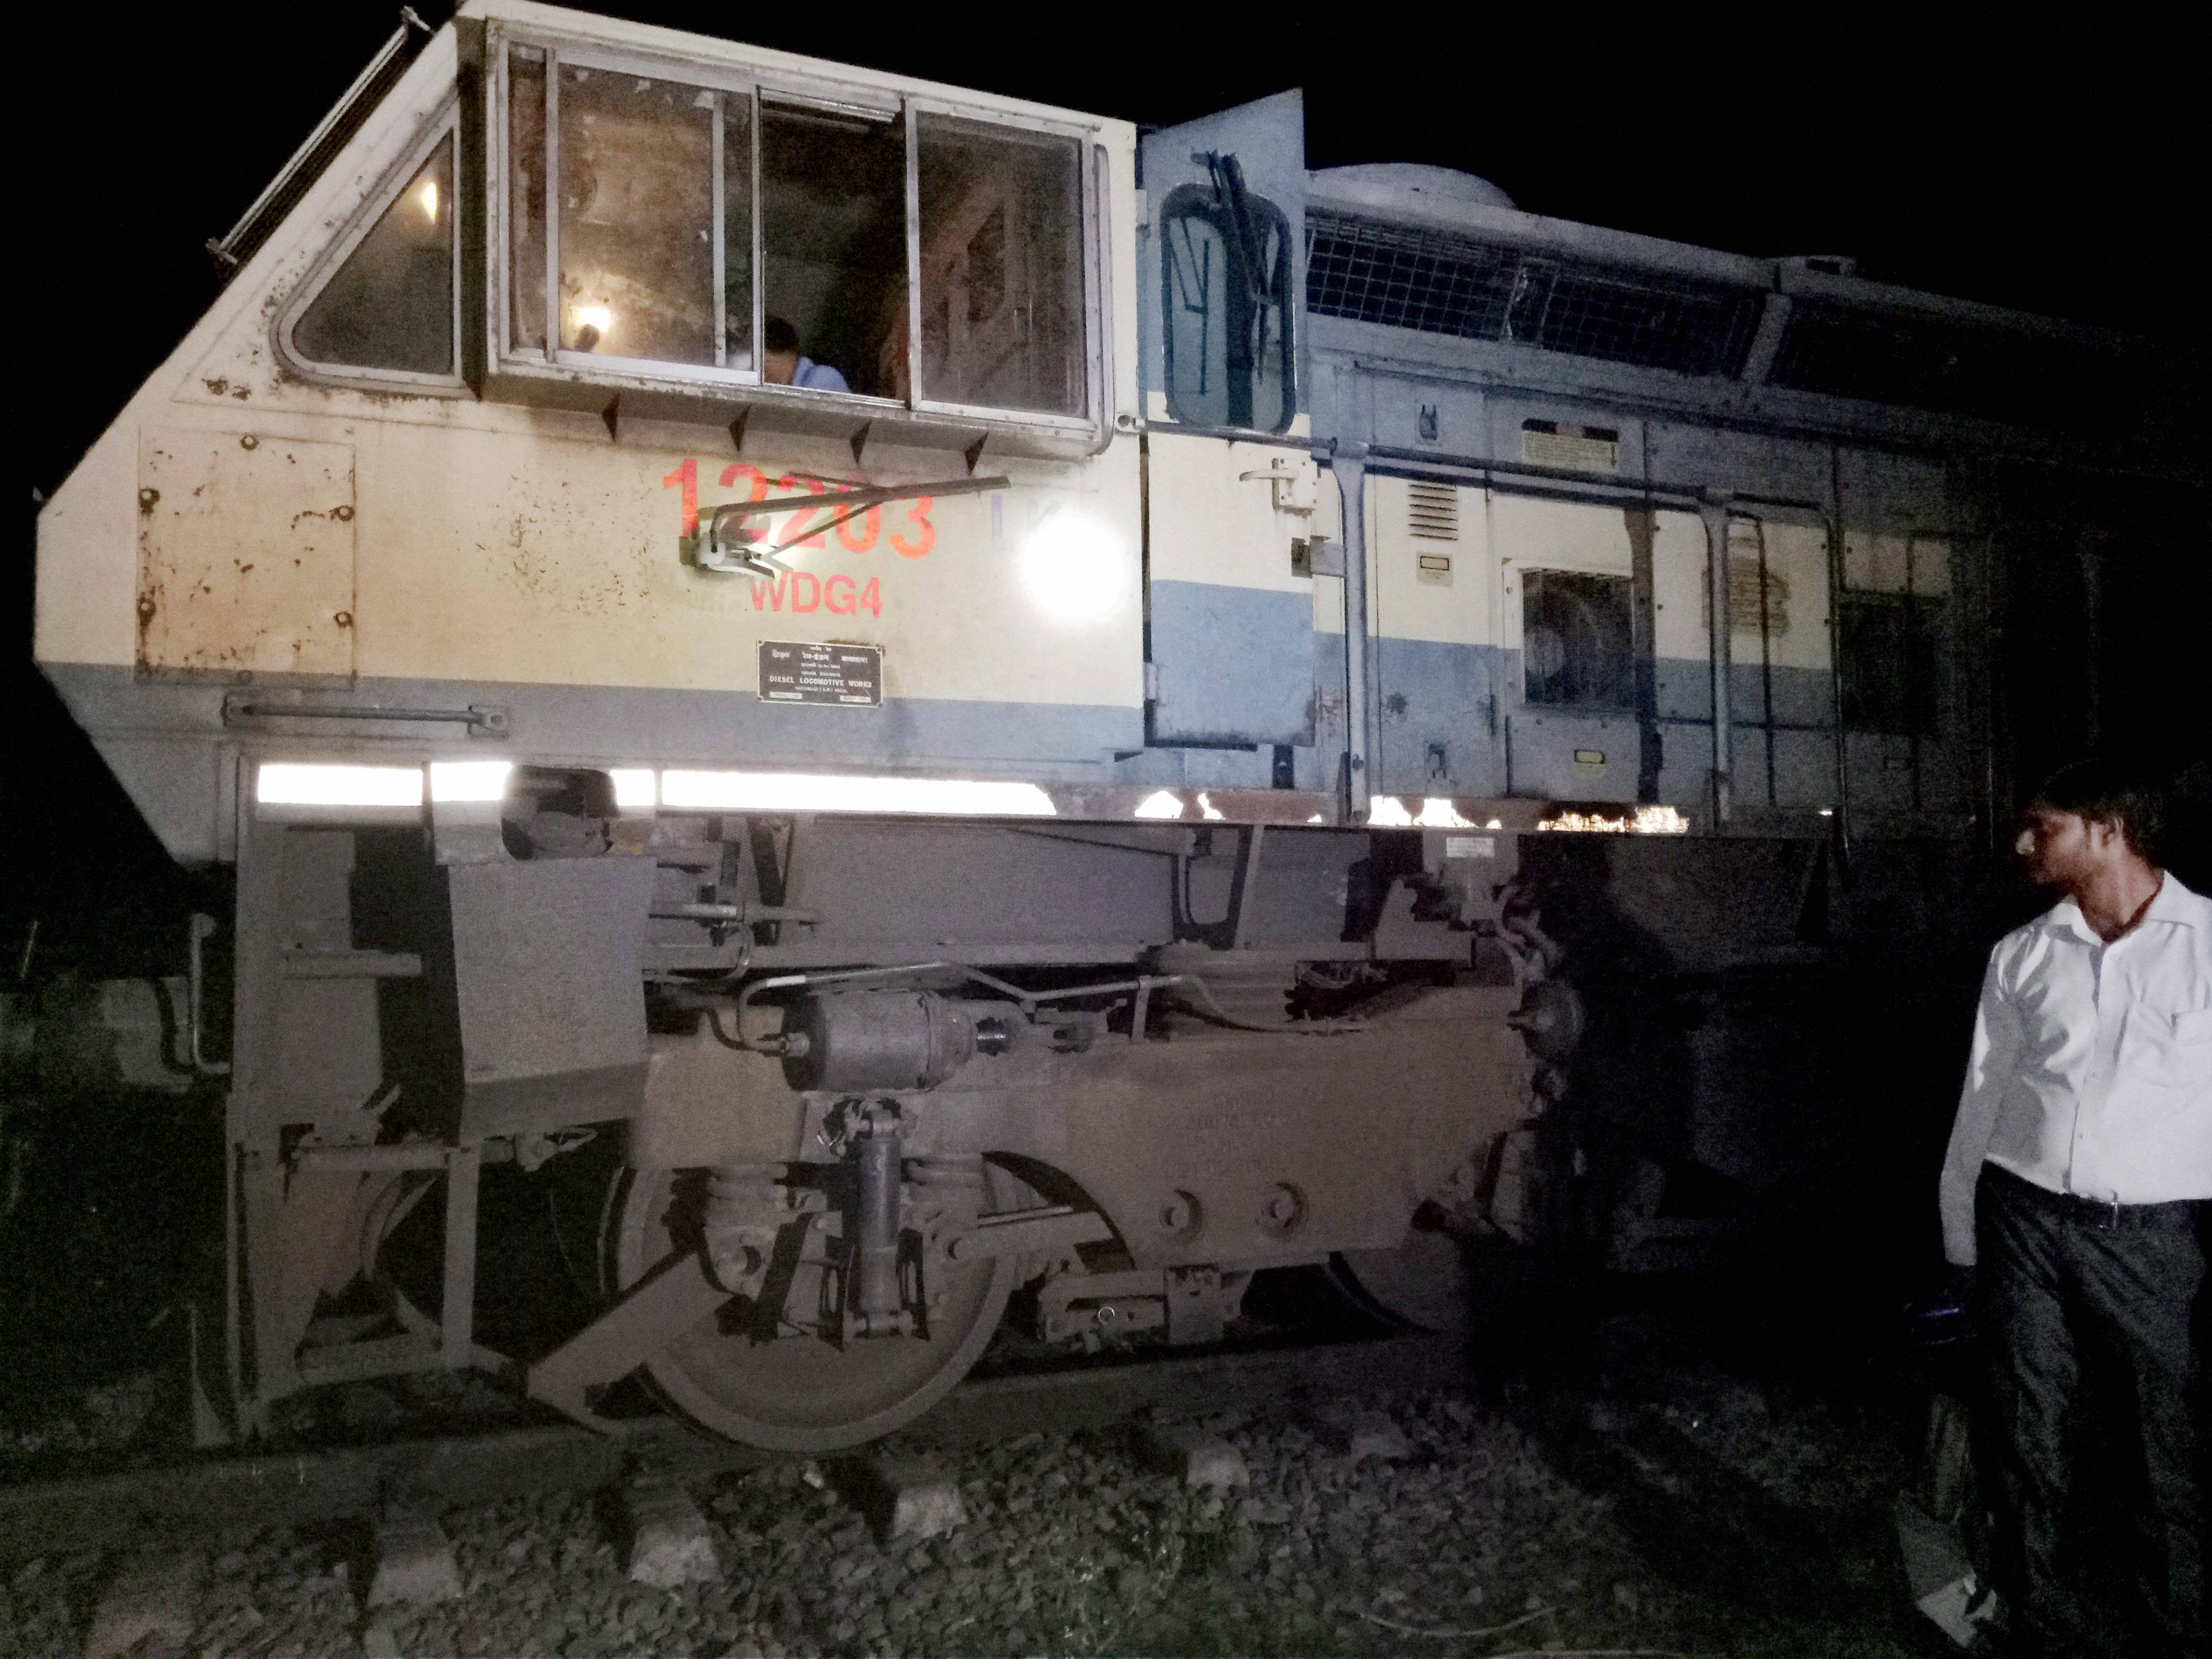 Two trains derail at the same spot within 10 hours in north Indian state of Uttar Pradesh